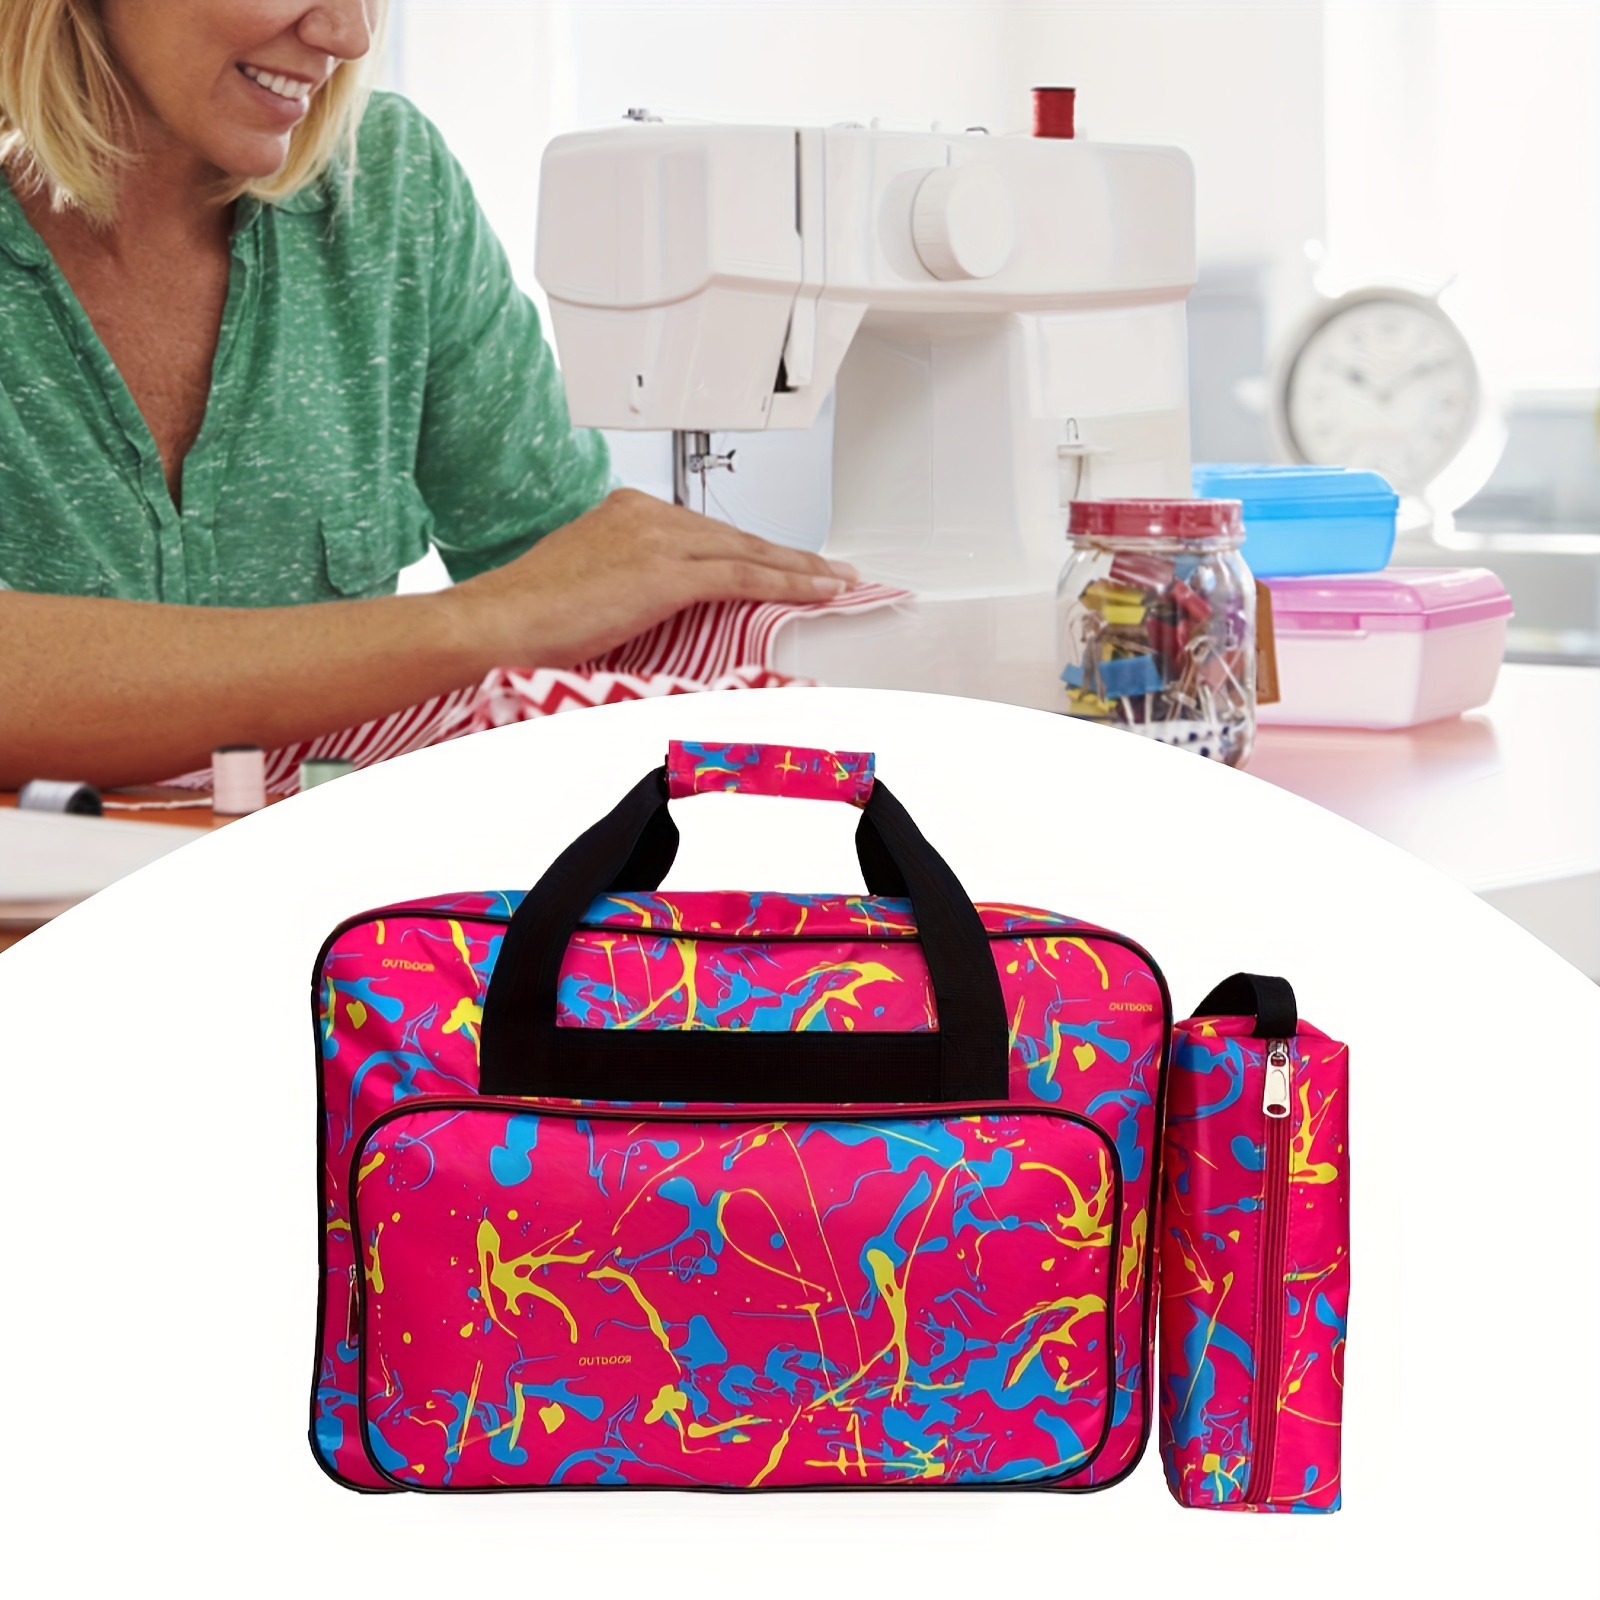 Sewing Machine Carry Bag - Other - Brother Machines